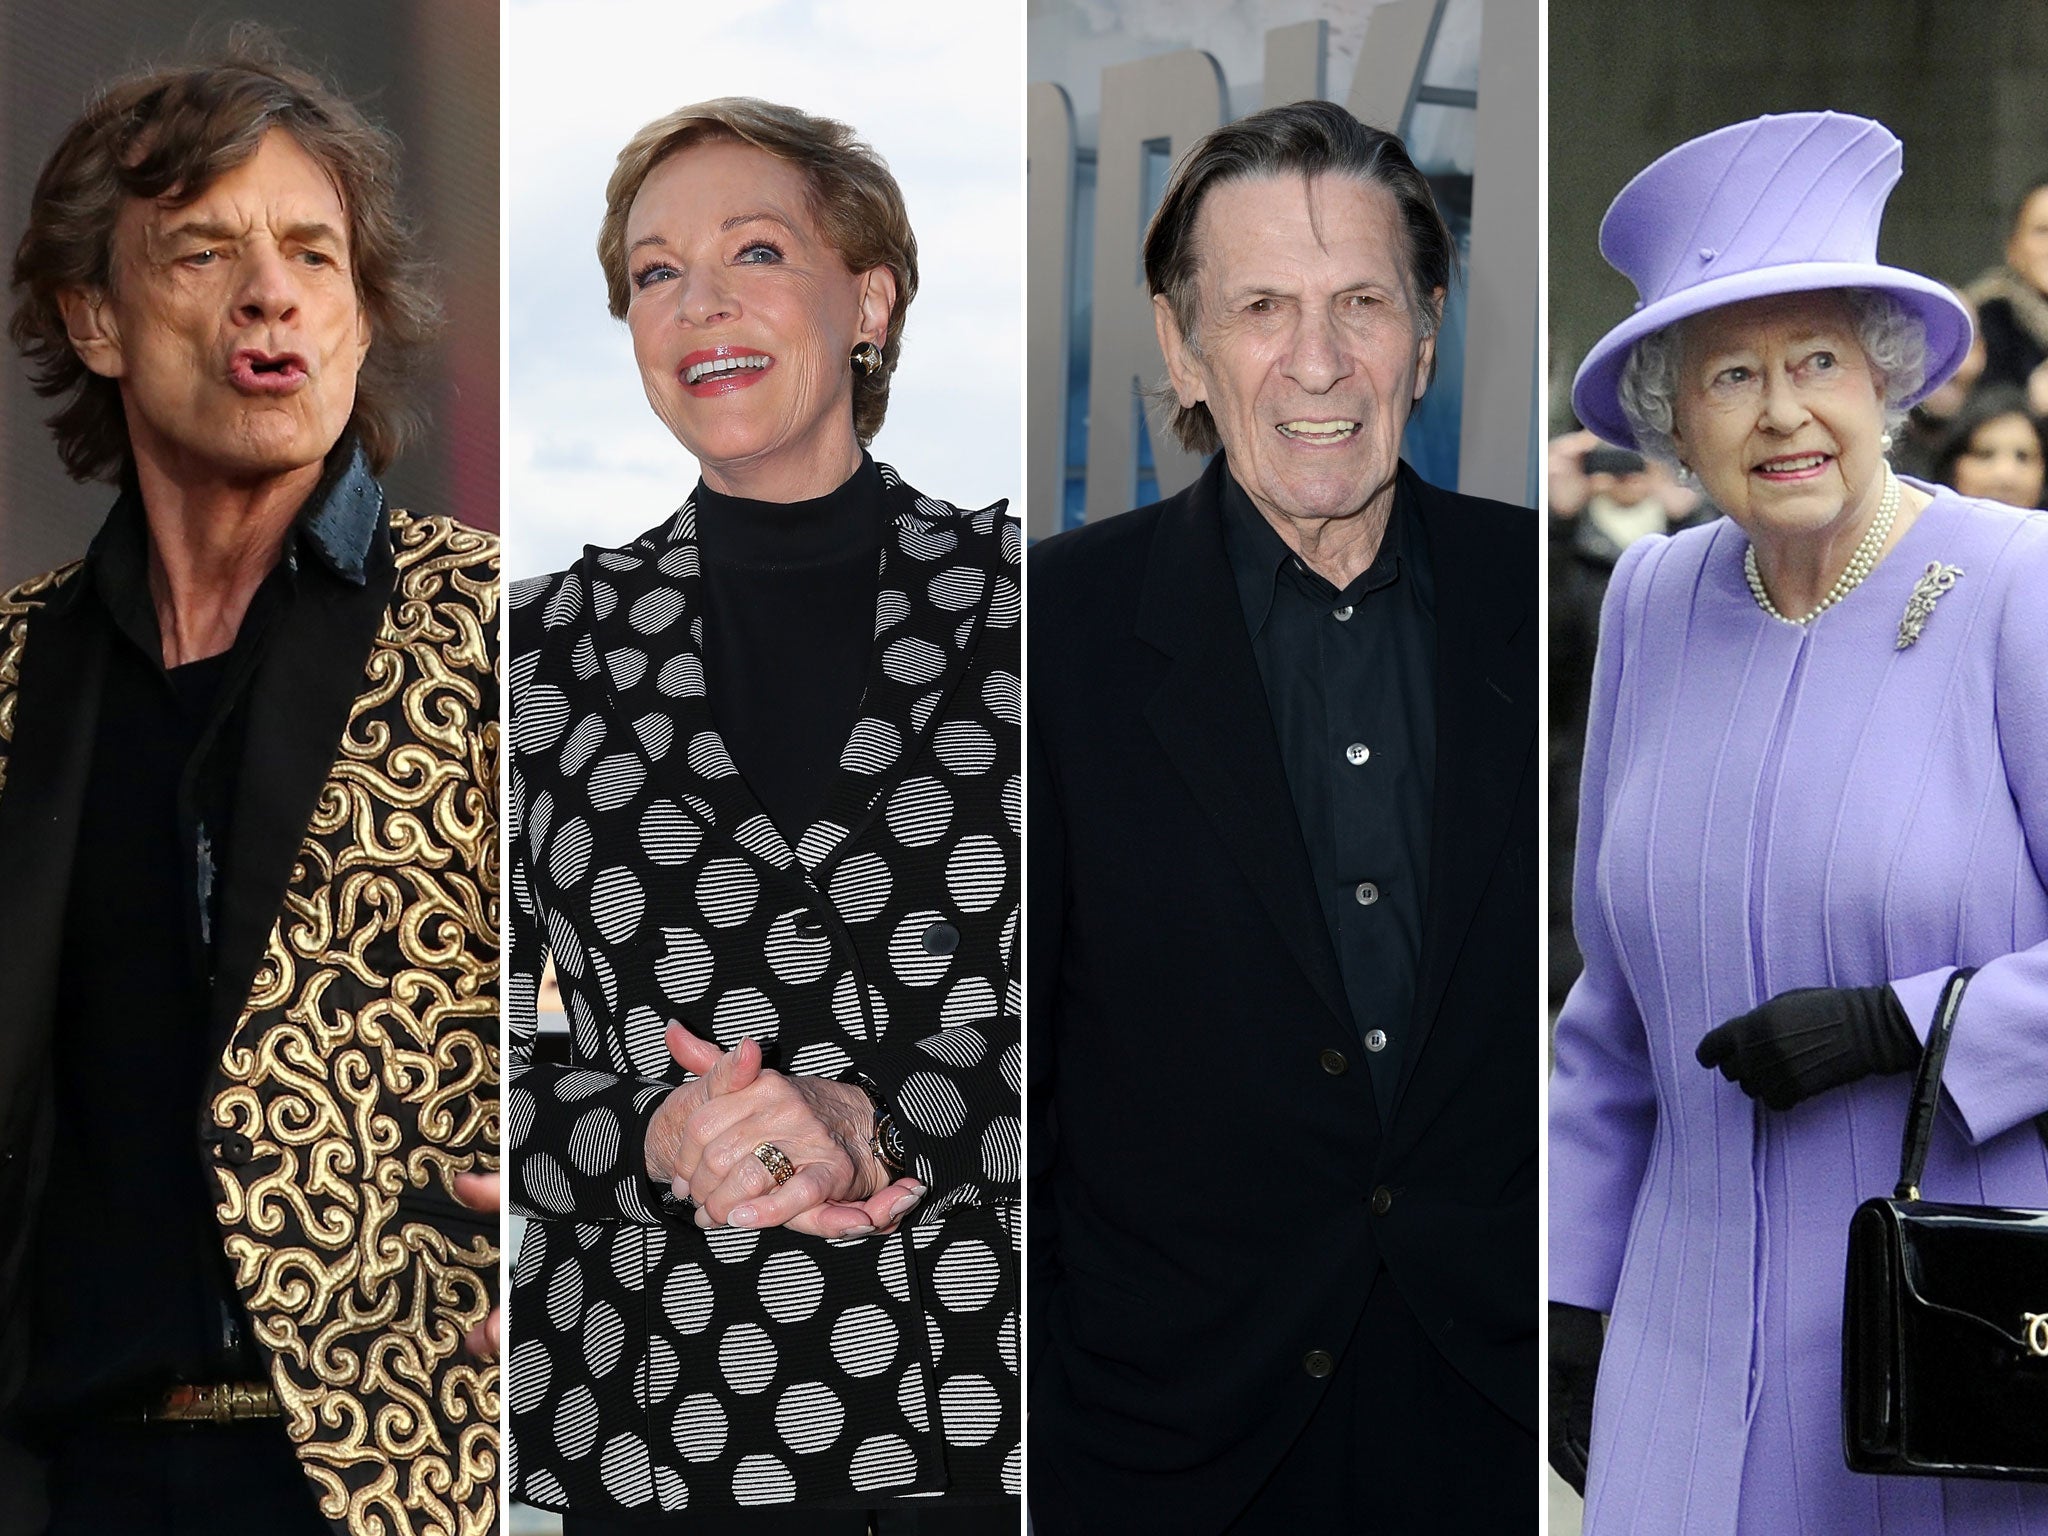 Jagger joins the GG club. Fellow members are: Julie Andrews, star of The Sound of Music; Leonard Nimoy, Star Trek's Dr Spock and Queen Elizabeth II